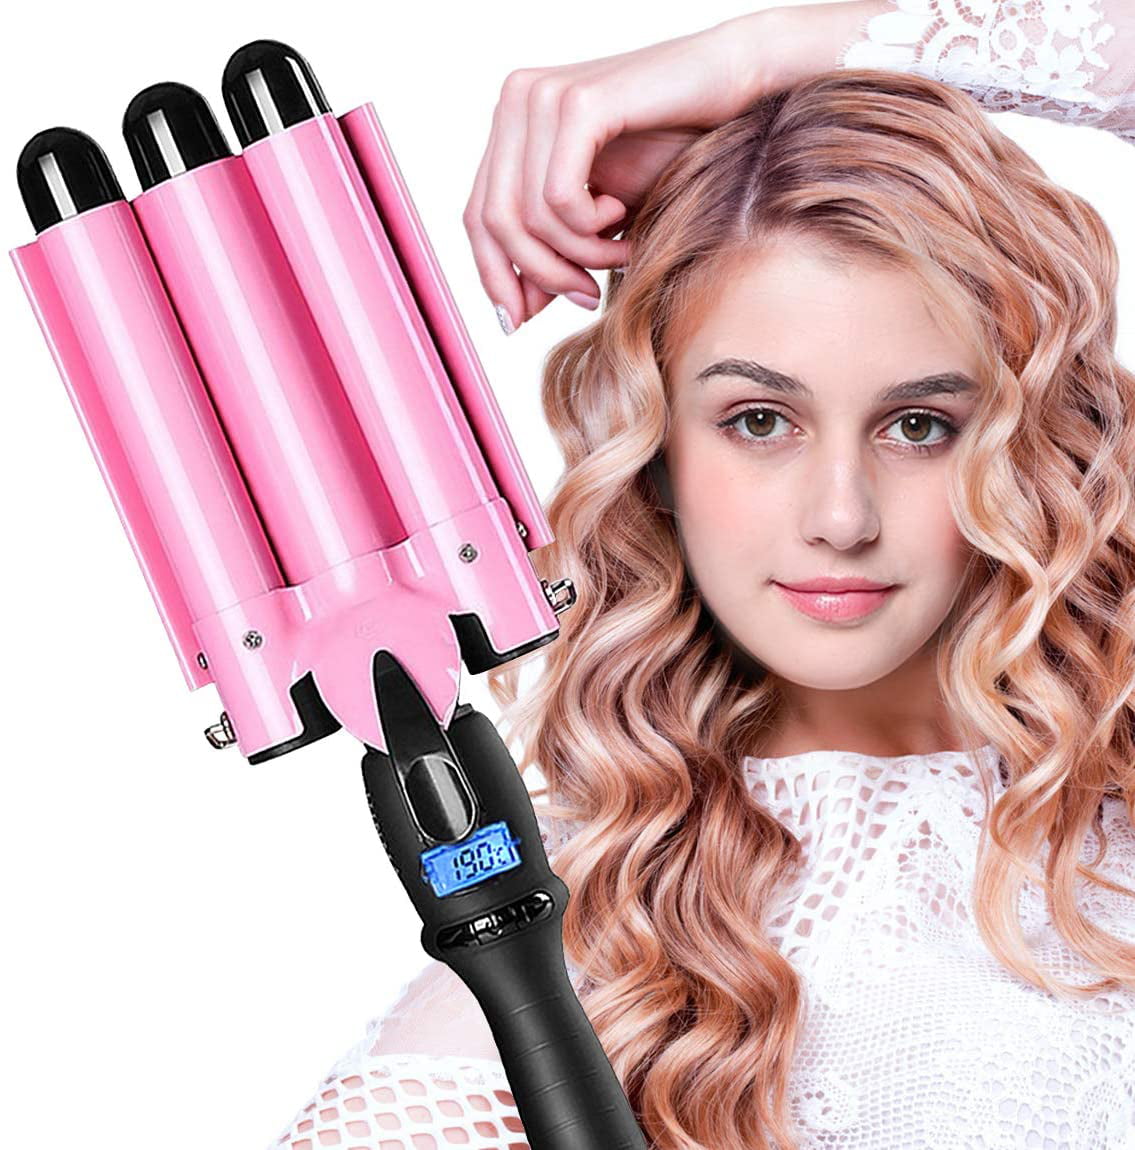 Automatic Hair Curler Ceramic Heating Ion Wave Hair Curling Iron Styler  Curlers two way rotating curling iron,Hair Styling Wand,Ceramic hot Curling  Iron - Walmart.com